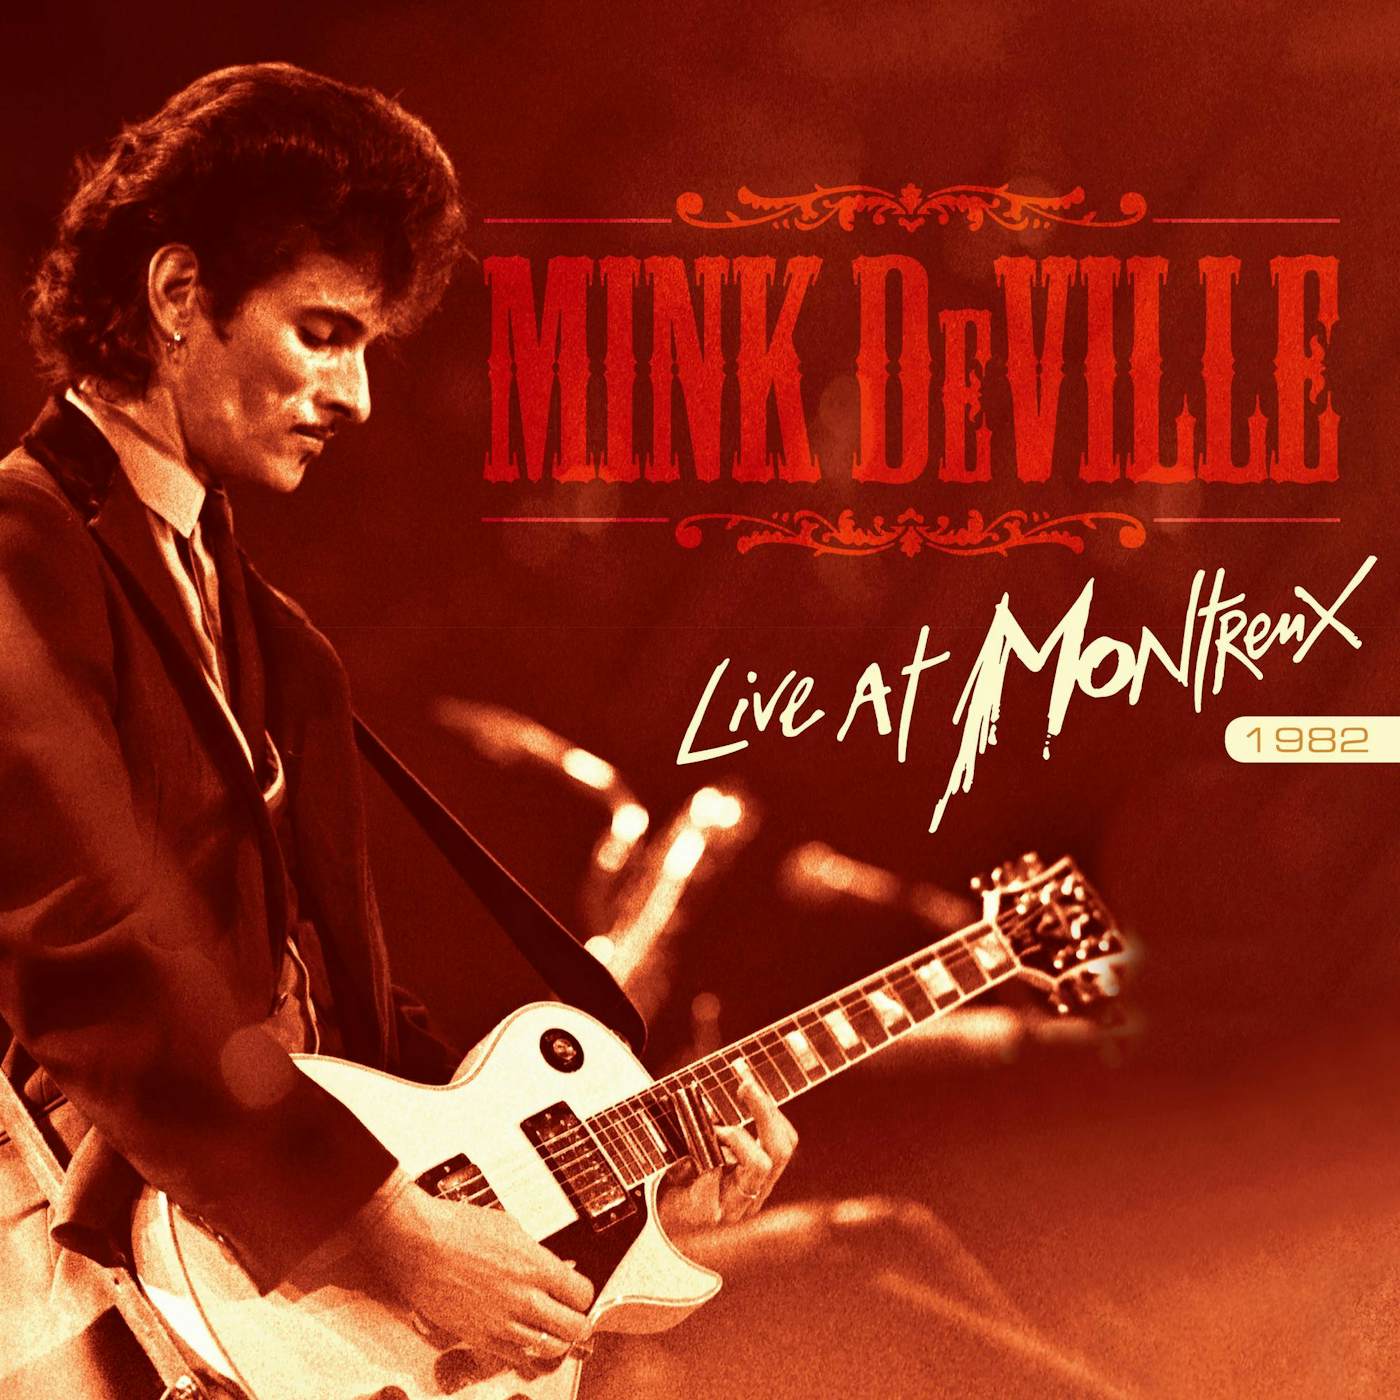 Willy DeVille Live At Montreux 1982 Vinyl Record